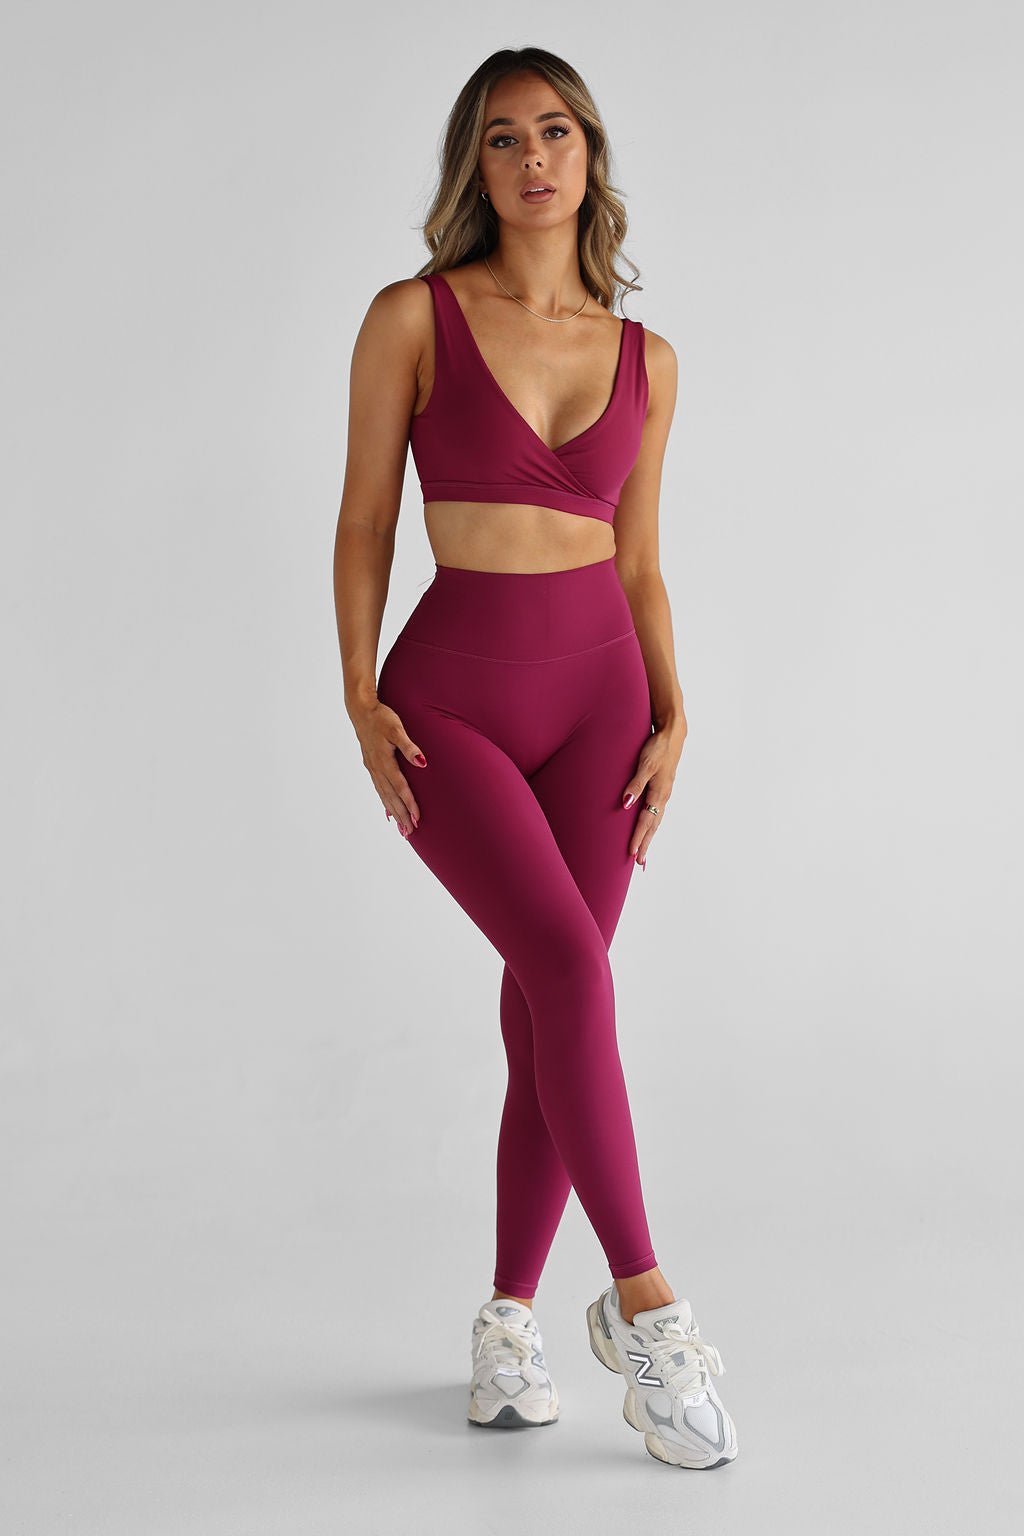 Buy CUVU Ankle Leggings for Women's - Size (XXL) Colour (French Wine) at